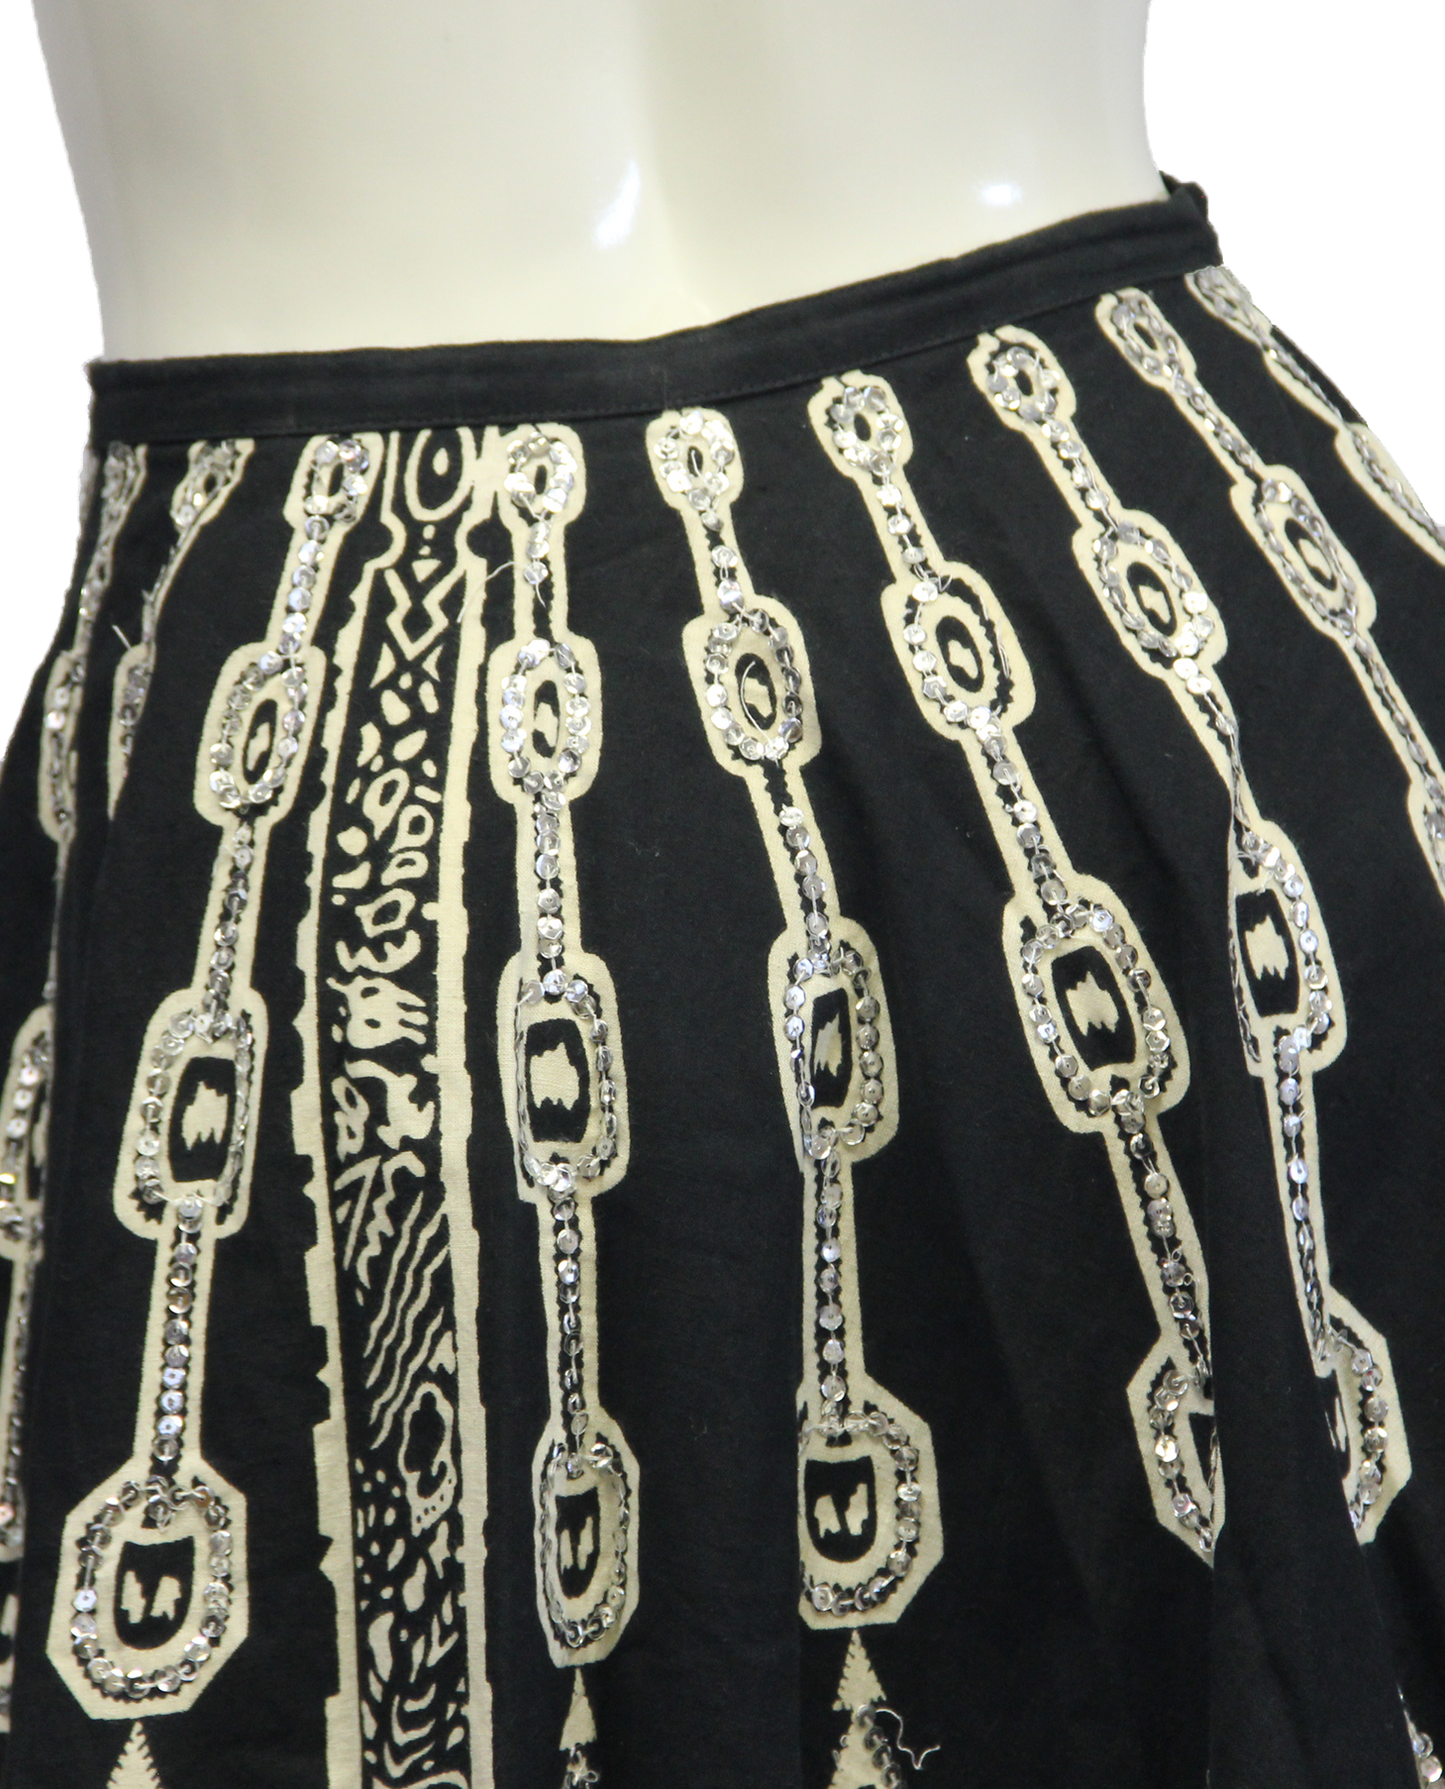 Hobo Black and White Skirt Size L/XL (SKU 000026) - Designers On A Dime - 4